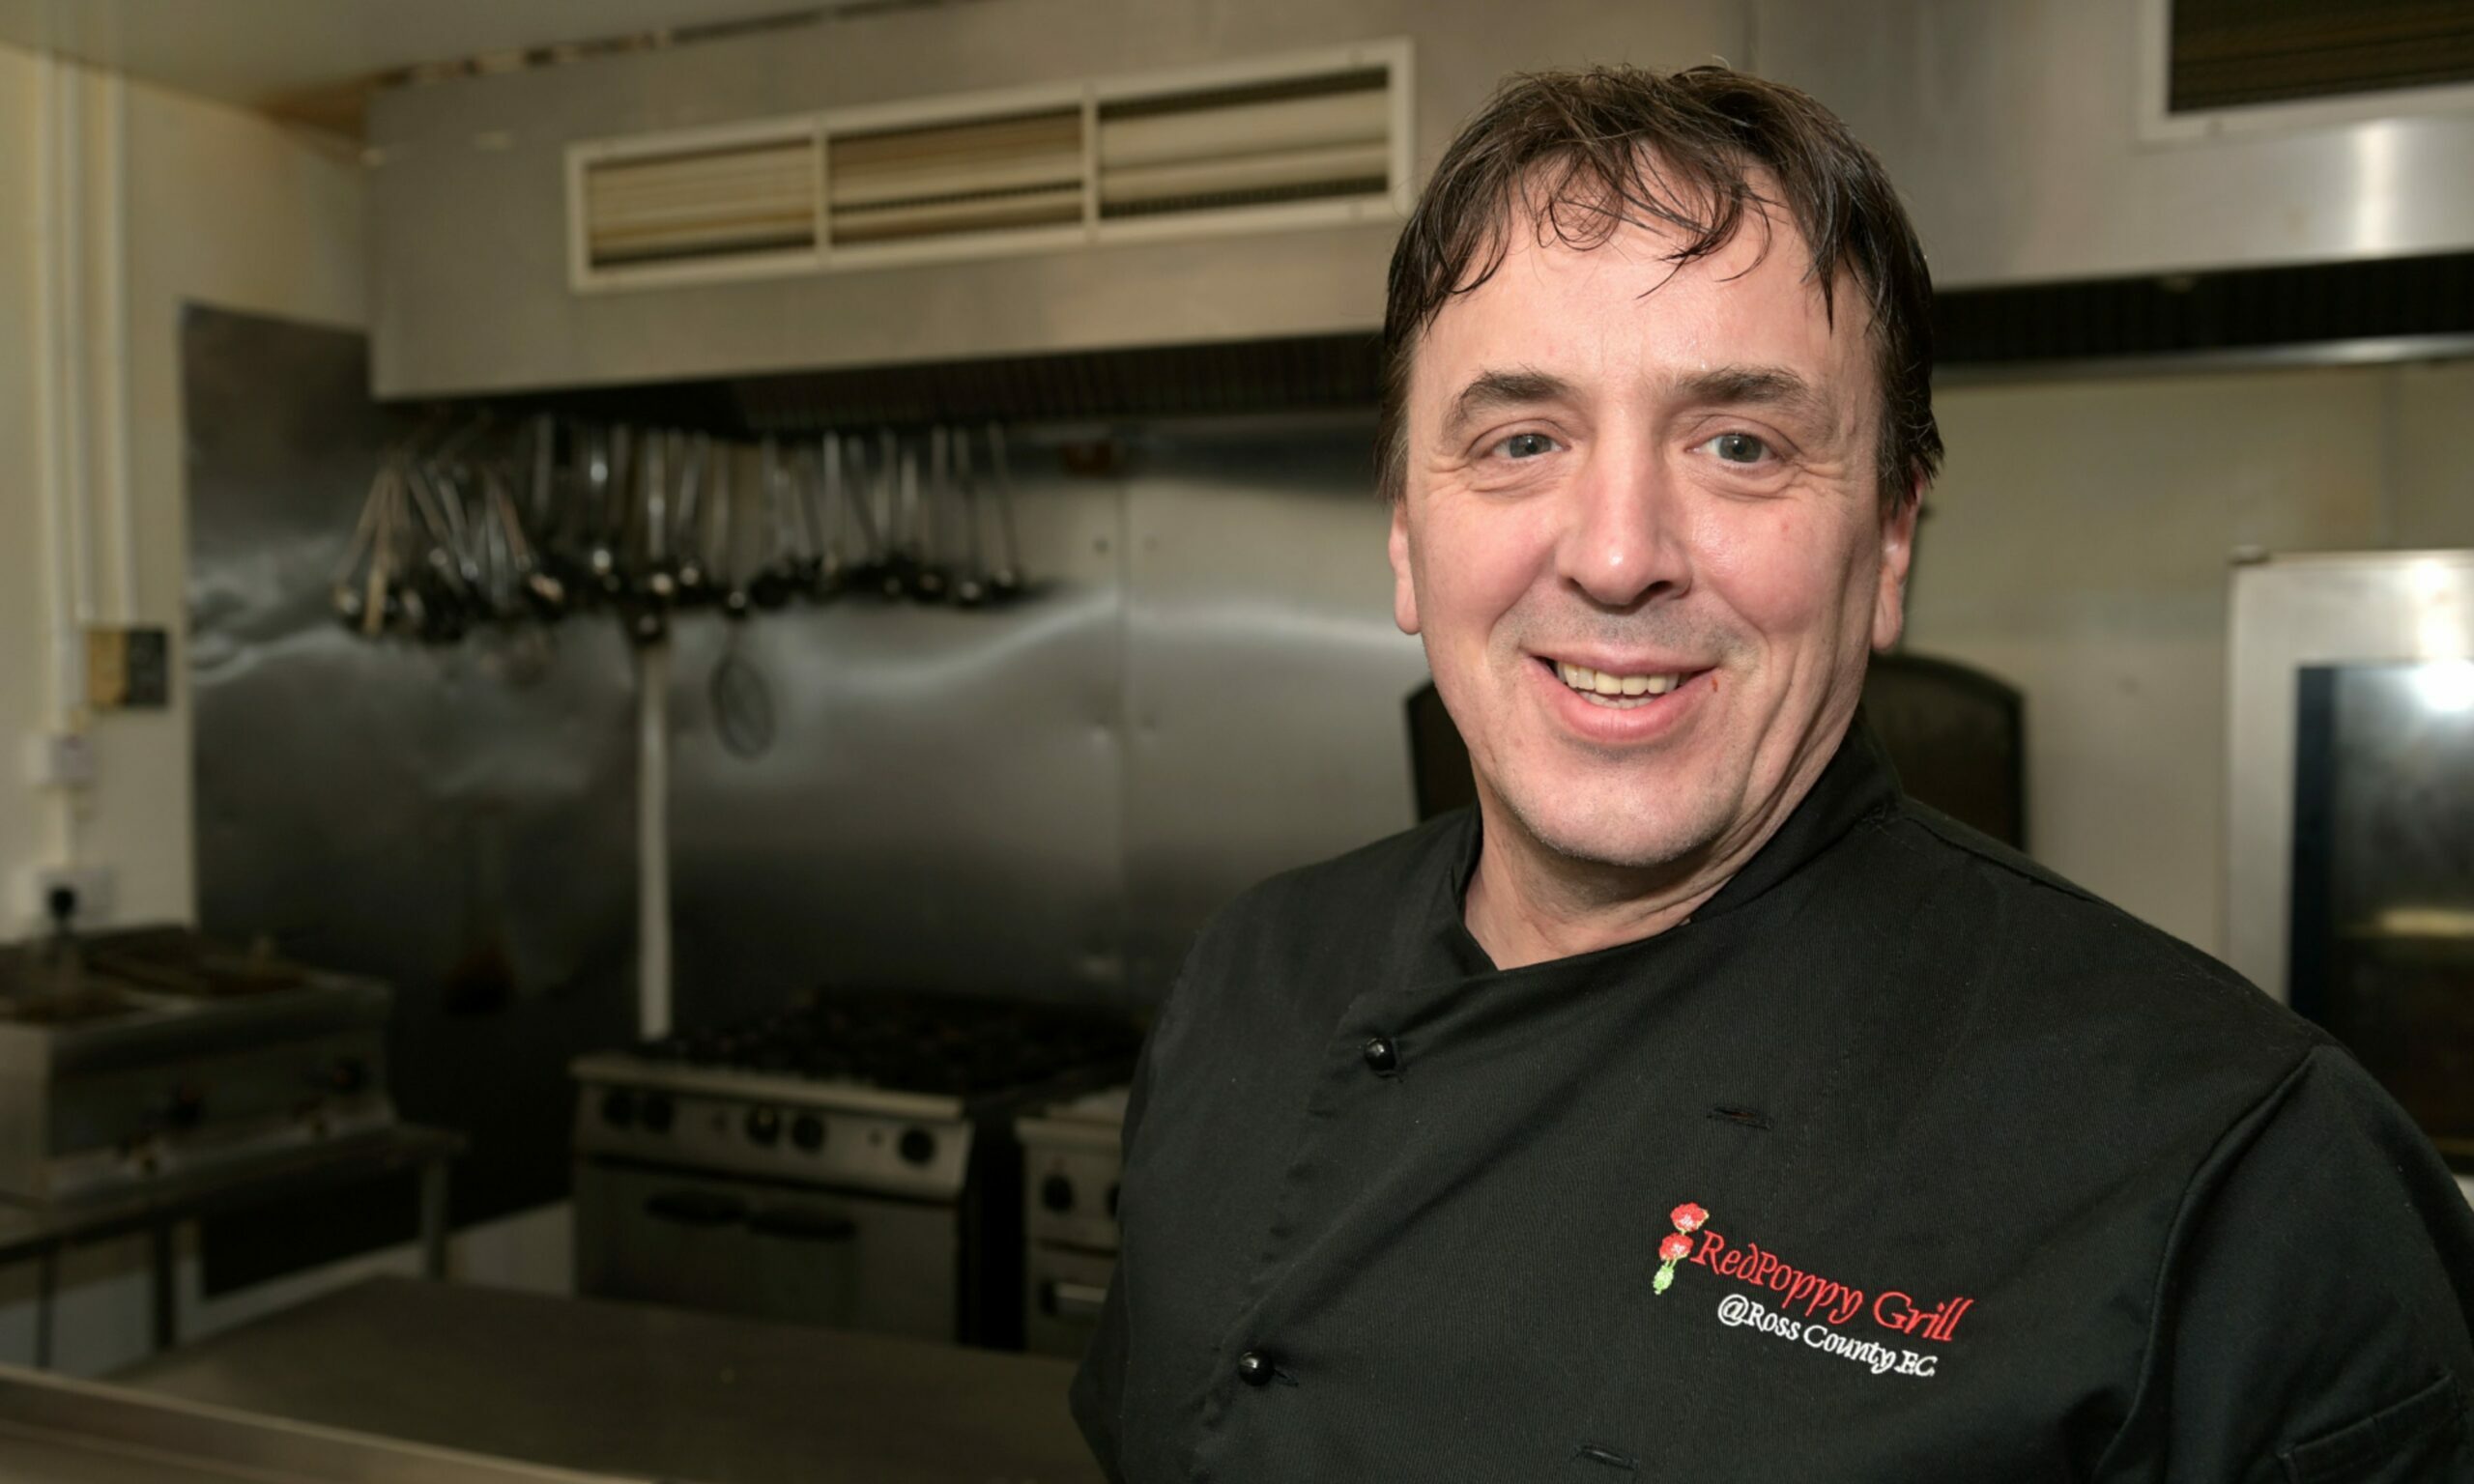 Nick Aburrow: "I have always loved food and cooking."